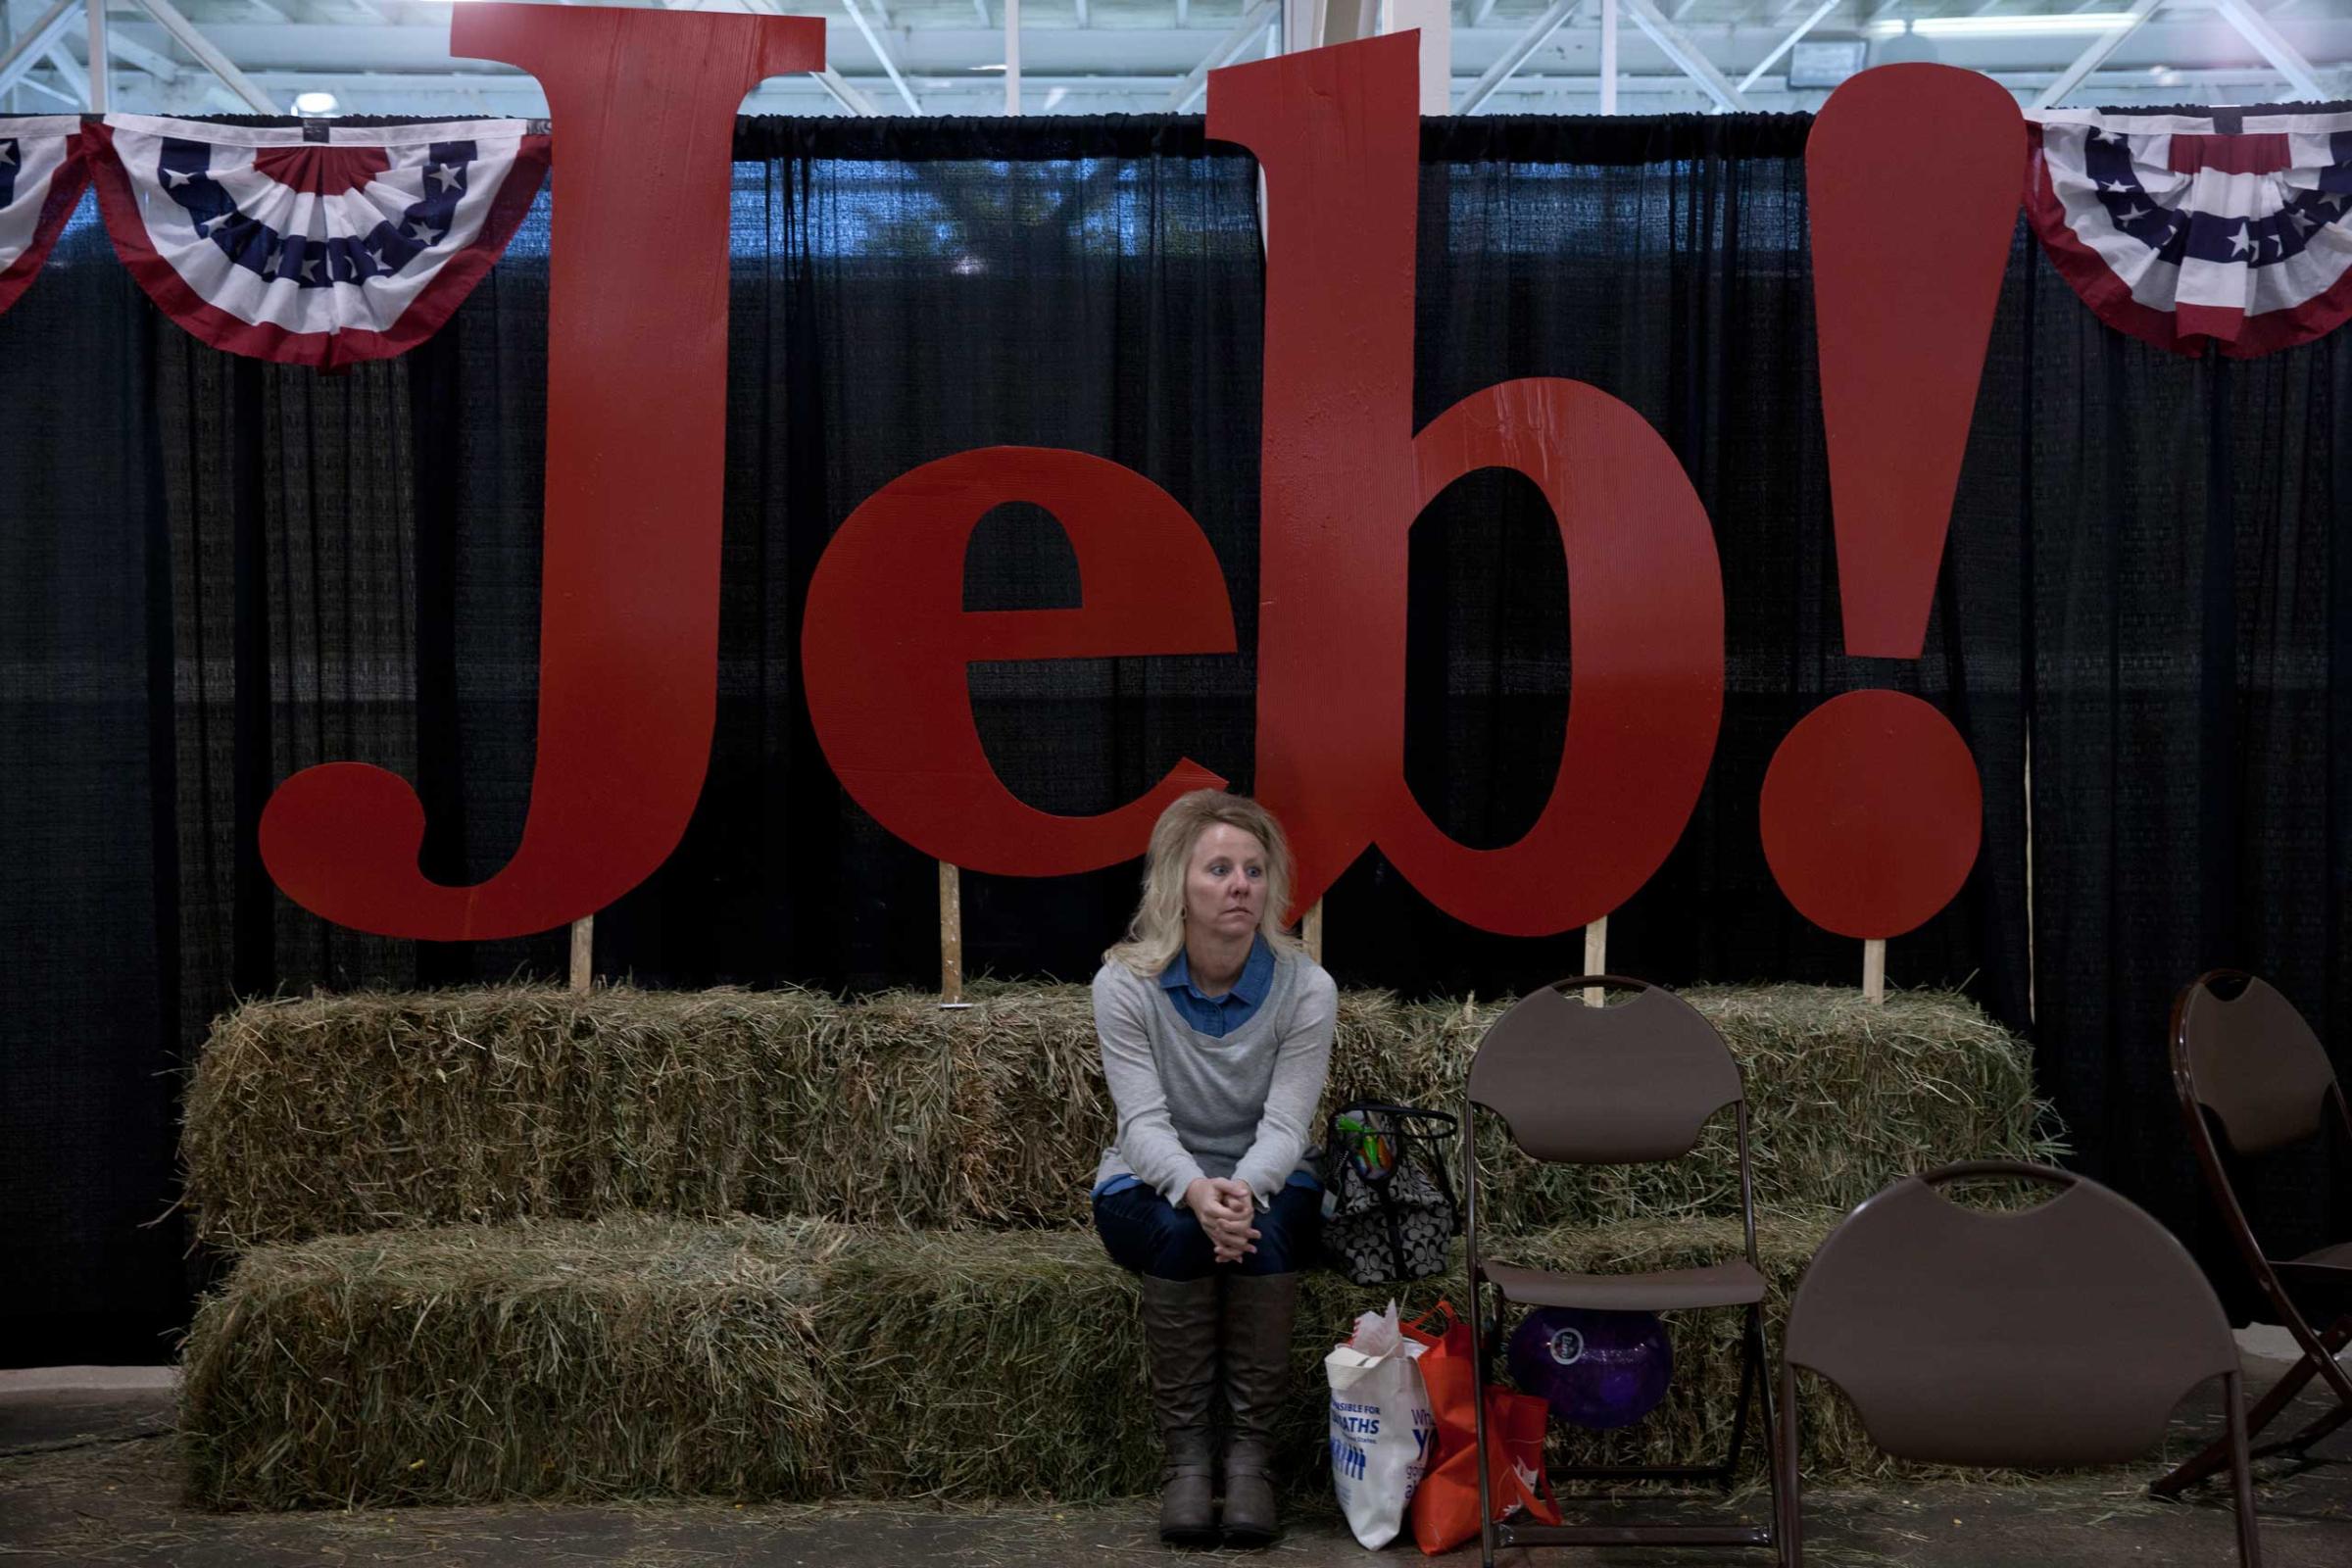 A Jeb Bush supporter is seen at the “Growth and Opportunity Party” In Des Moines, Iowa. Nov. 7, 2015.